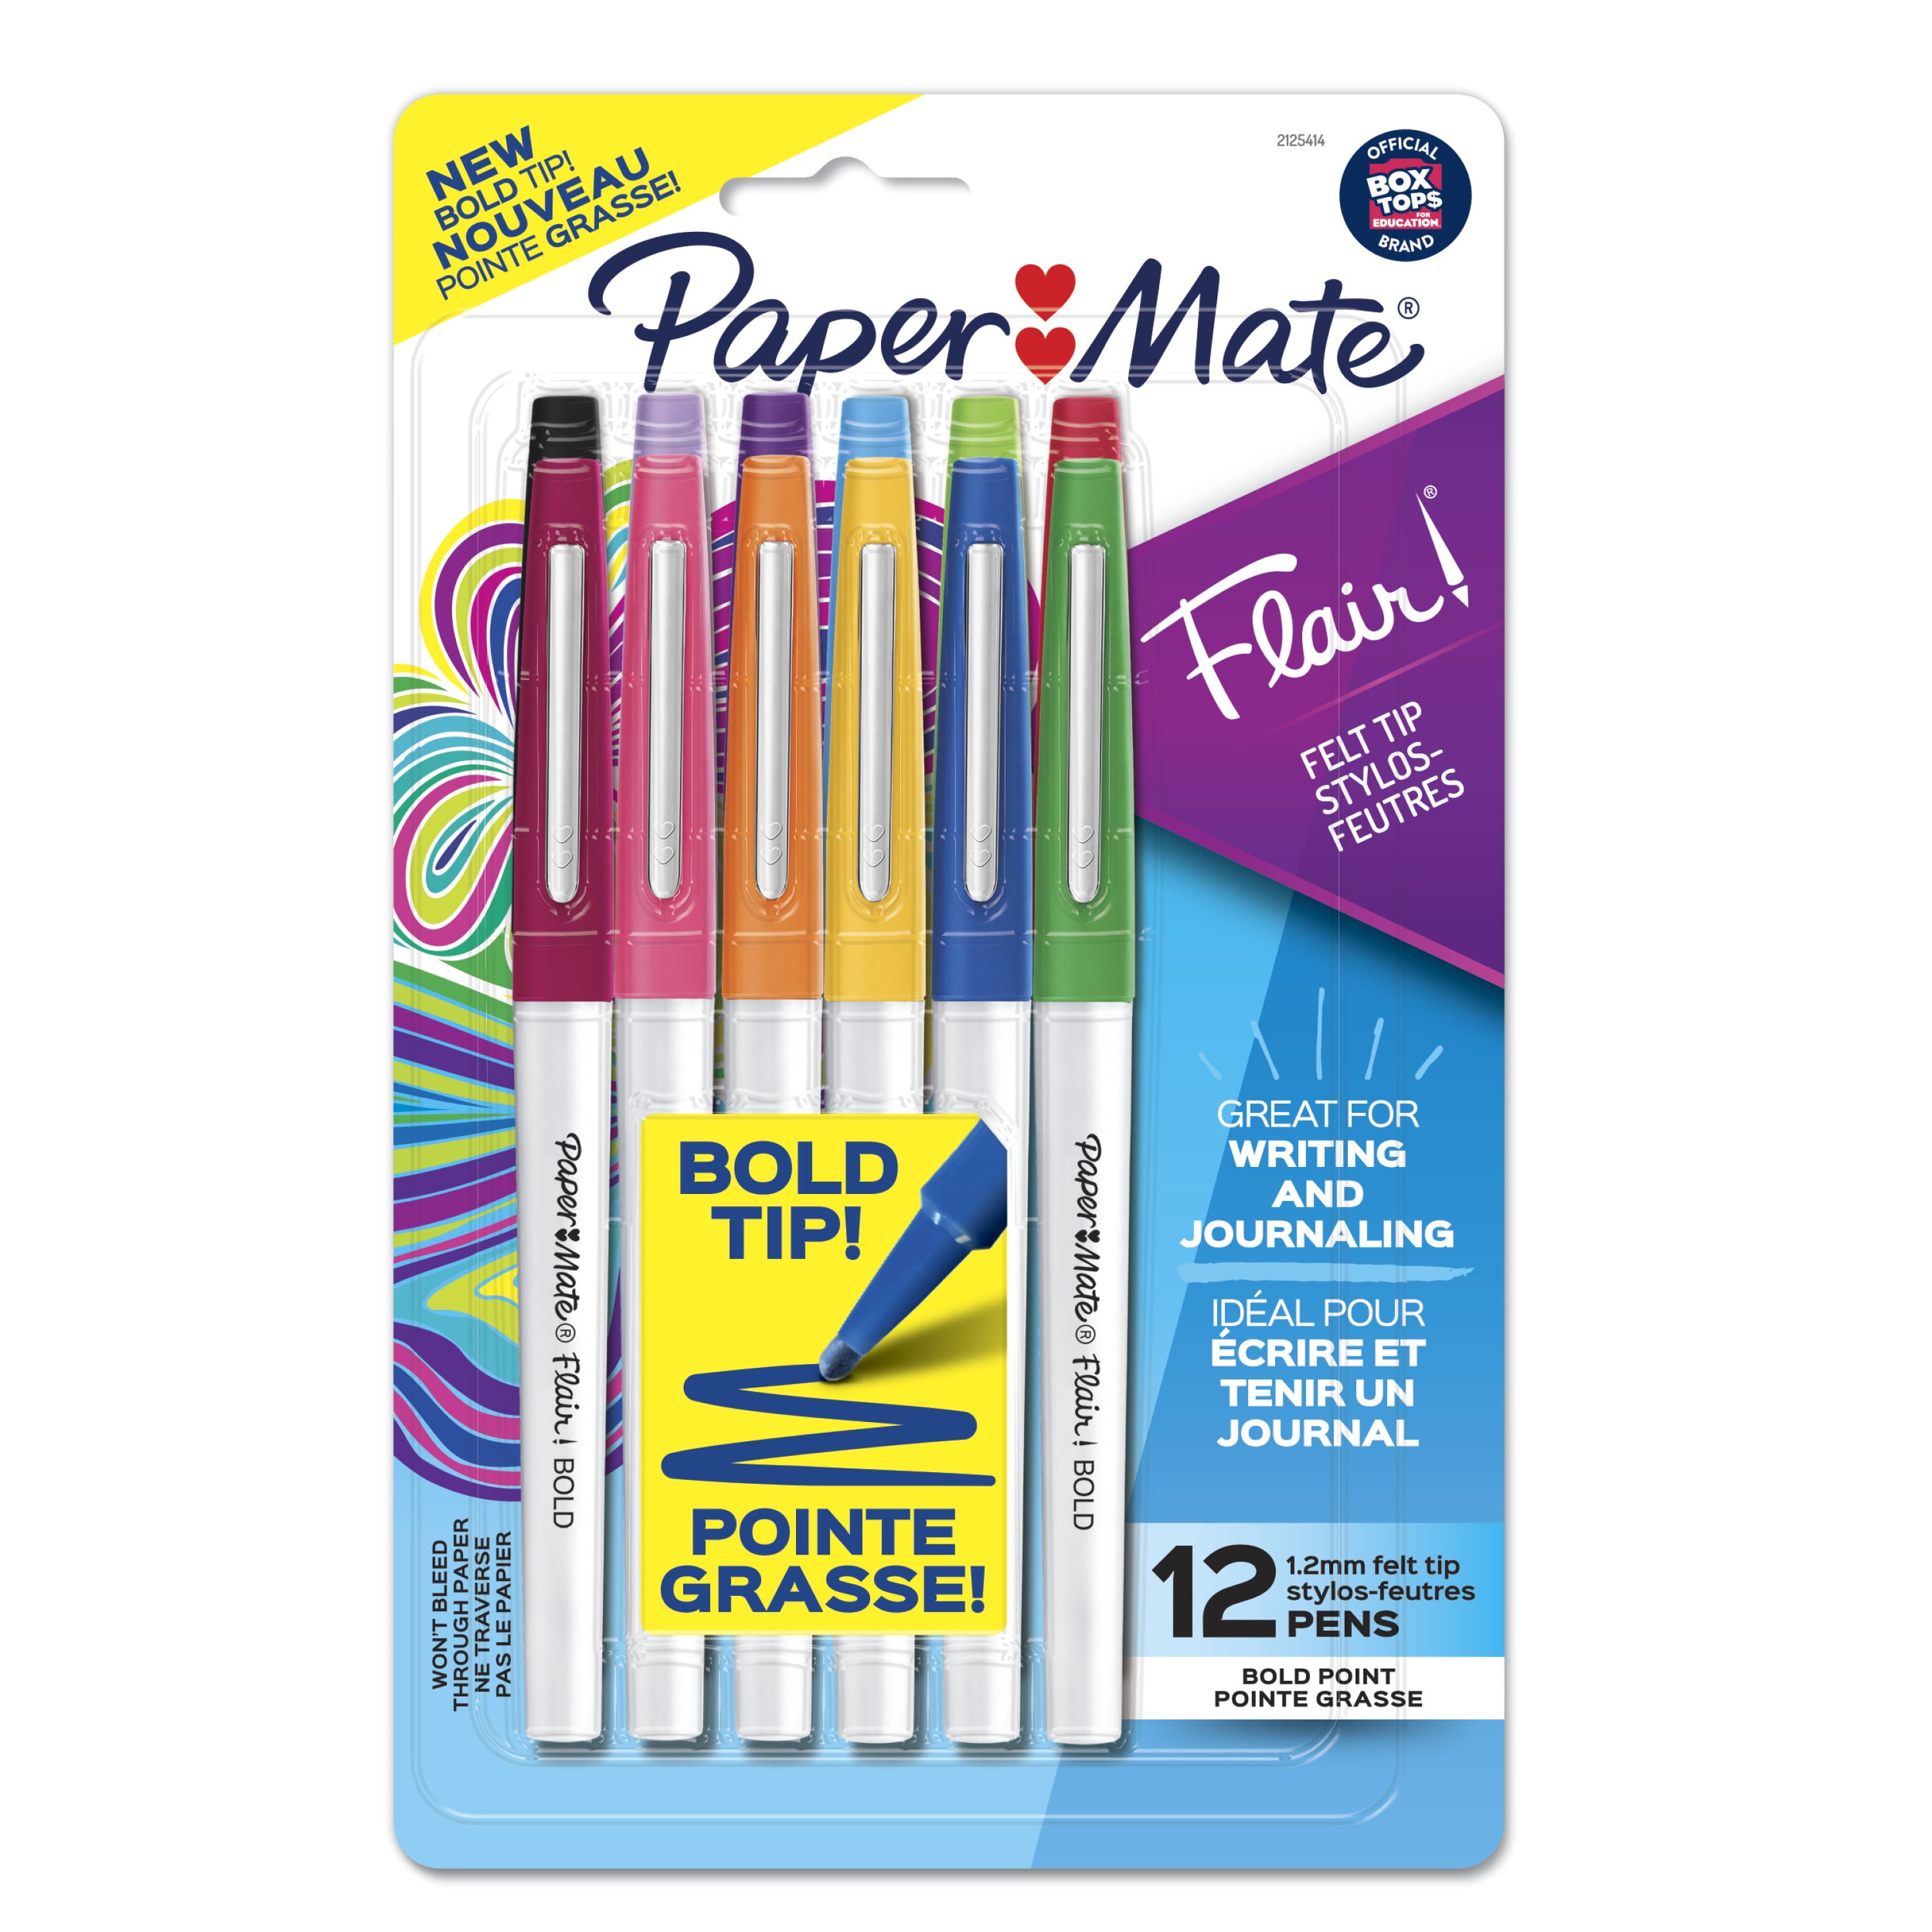 Dual Tip Brush Pens Art Markers, Shuttle Art 96 Colors Fine and Brush Dual  Tip Markers Set with Pen Holder and 1 Coloring Book for Kids Adult Artist  Coloring 